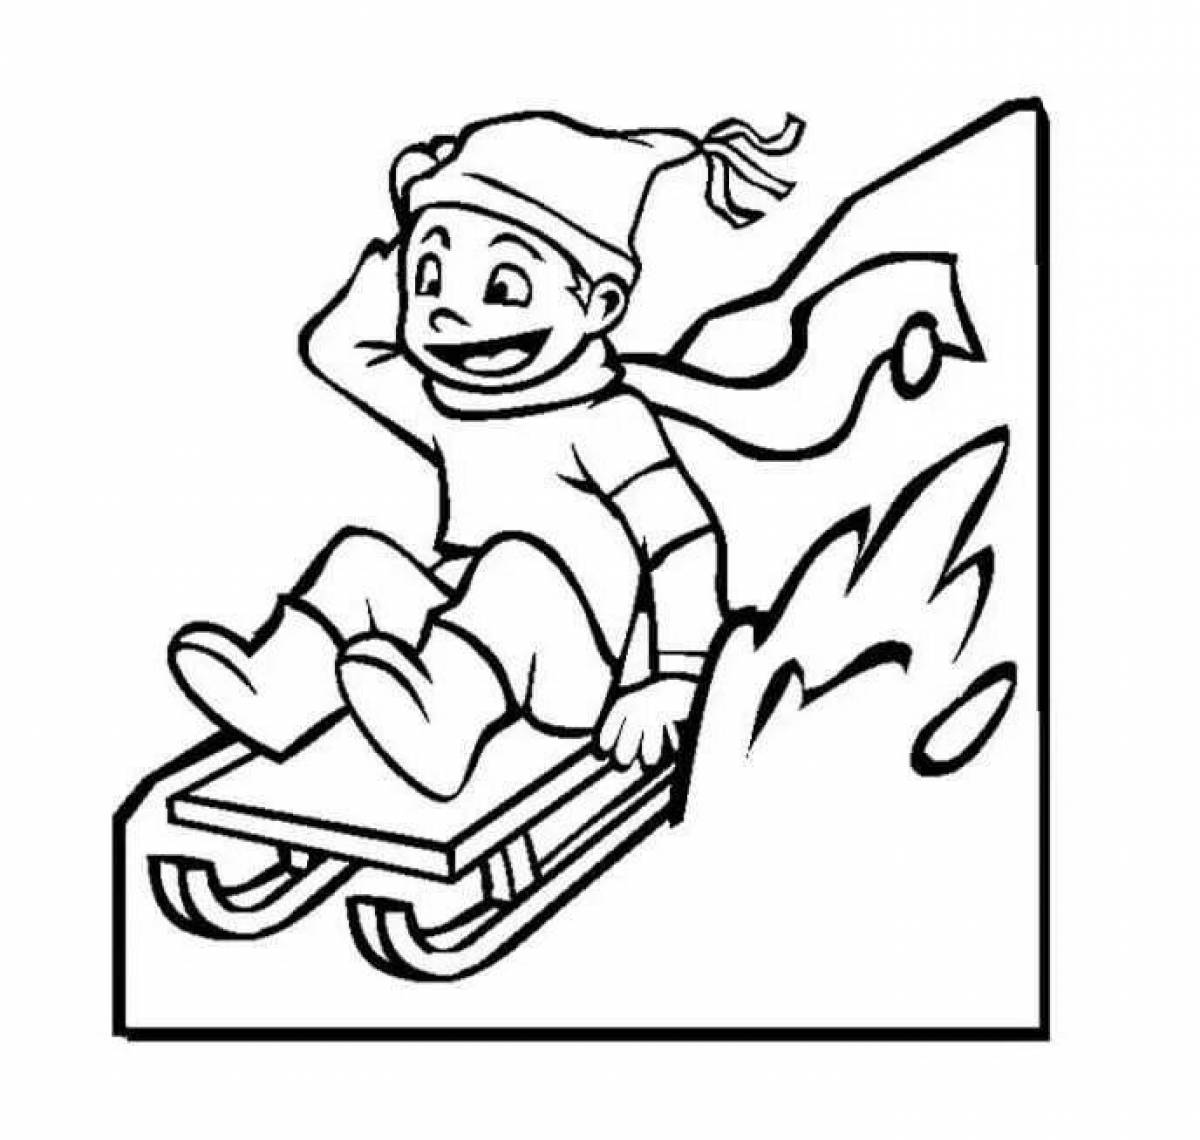 Coloring page enthusiastic children sledding